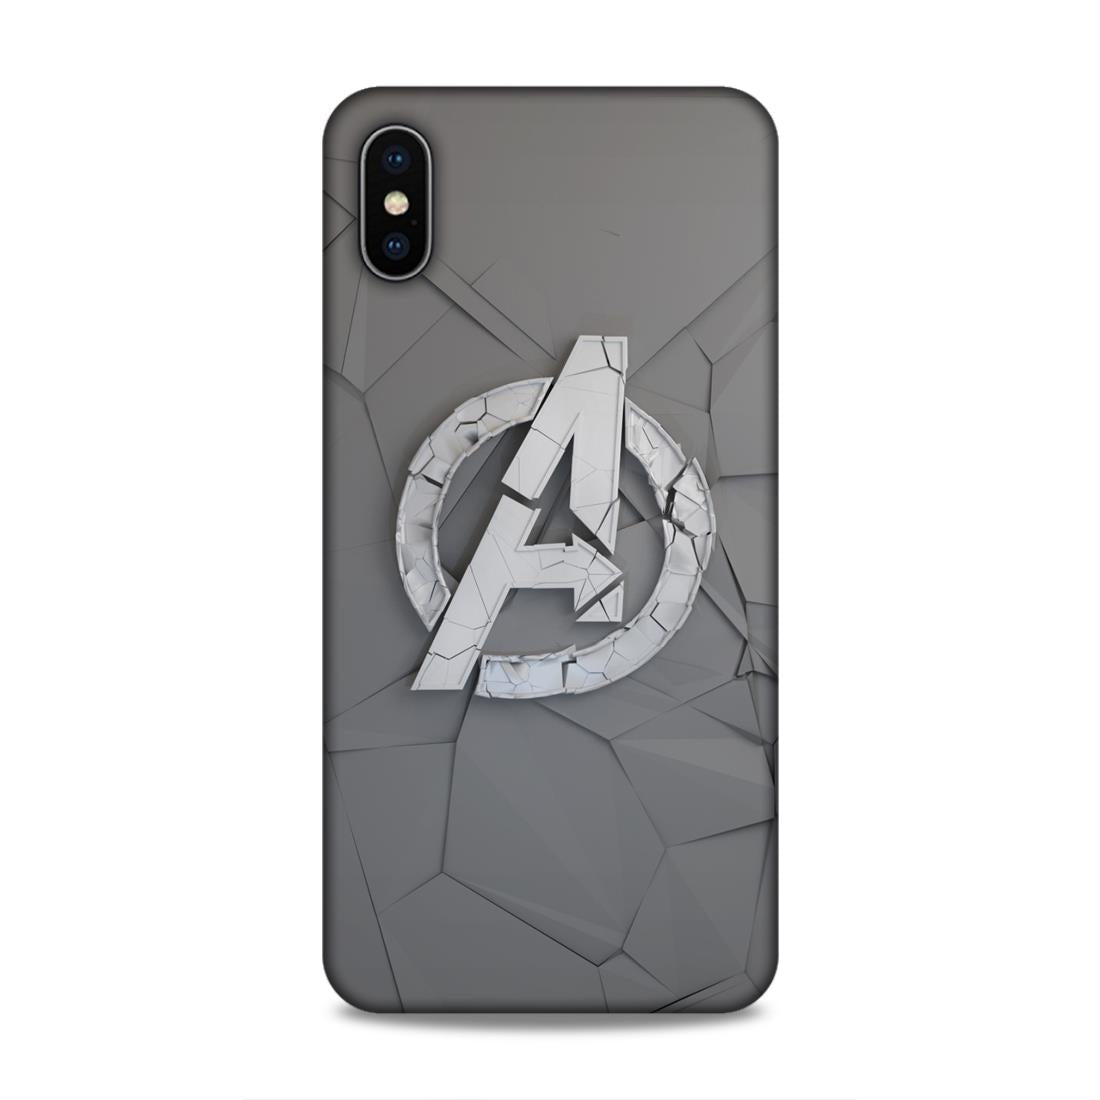 Avengers Symbol Hard Back Case For Apple iPhone XS Max